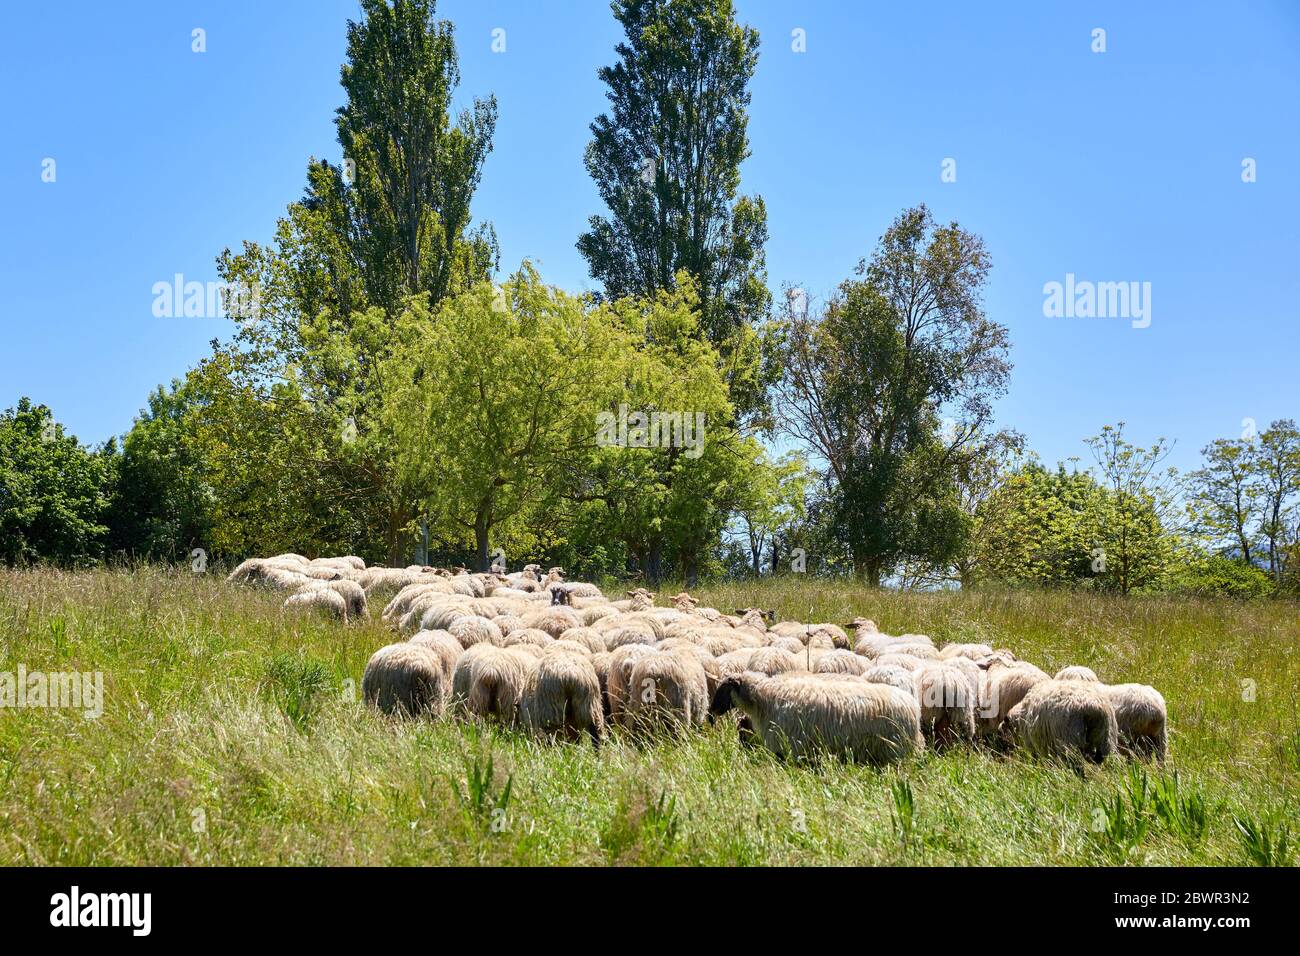 Animal research, Flock of sheep, Araba, Basque Country, Spain Stock Photo